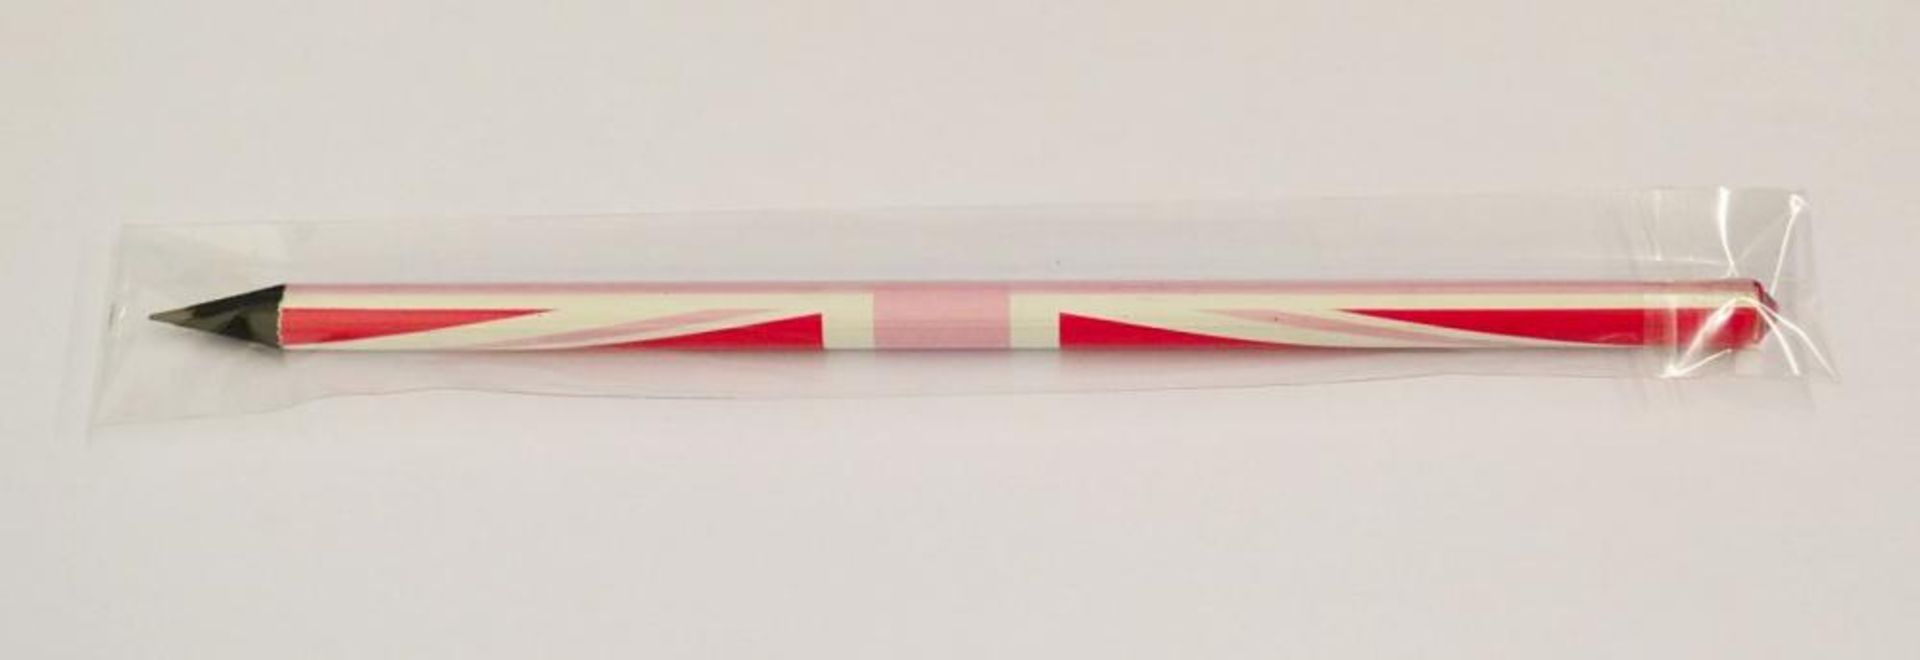 140 x ICE London "Union Jack" Pencils - Made With SWAROVSKI® ELEMENTS - Colour: PINK - New / Sealed - Image 3 of 3